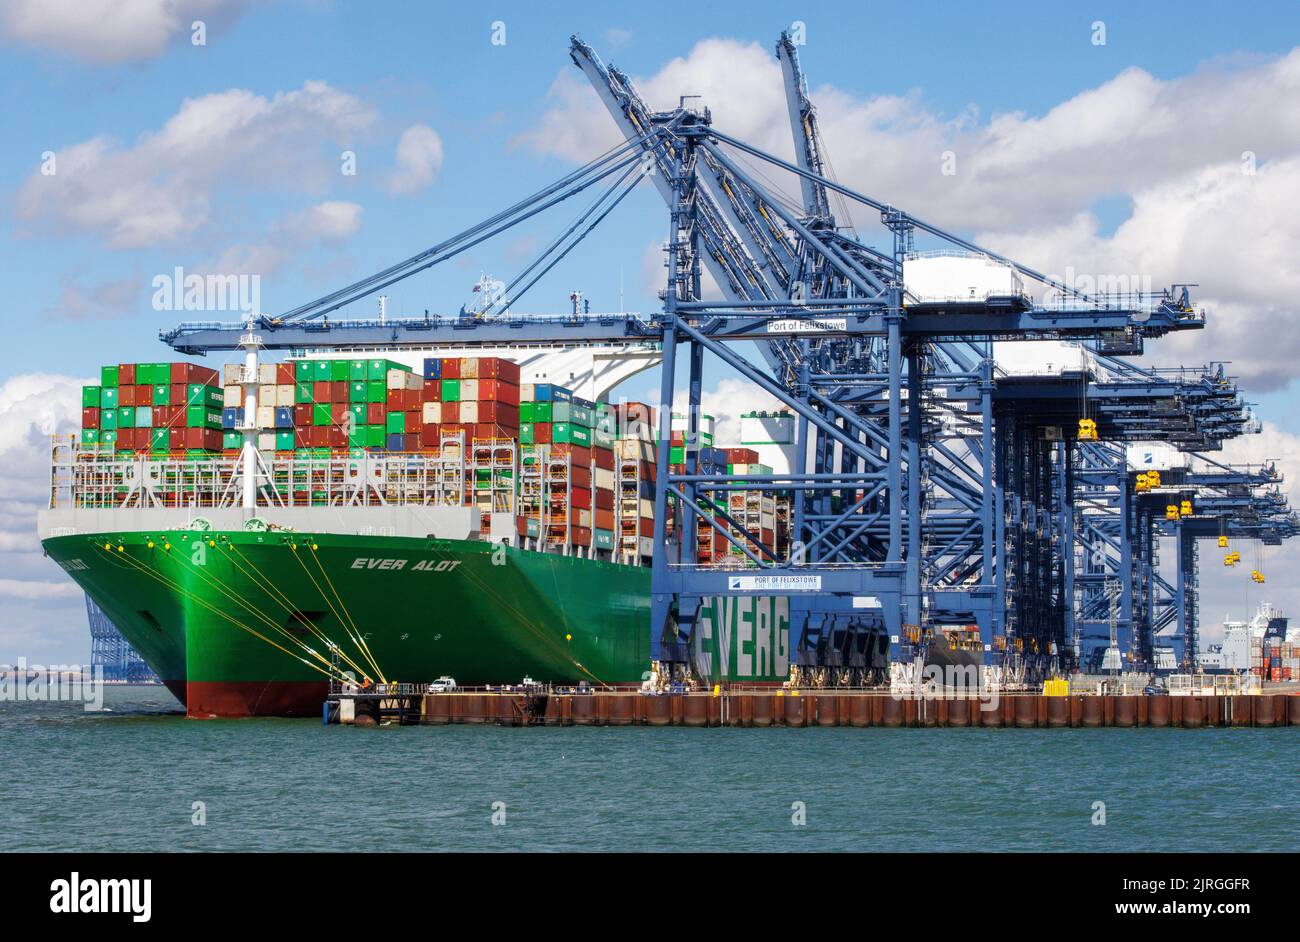 Felixstowe, UK 24 Aug 2022 The Ever Alot is berthed at the Felixstowe docks. It is the largest container ship in the world. The dockers are on strike over pay issues so the containers cannot be unloaded until the issue is resolved. Hudong-Zhonghua Shipbuilding Group Co. (Hudong-Zhonghua), a subsidiary of China State Shipbuilding Corporation (CSSC), built and delivered the world's largest containership to Taiwanese shipping company Evergreen Marine. The Ever Alot vessel has a carrying capacity of 24,004 TEU and measures 400 metres long by 61.5 metres wide, with a draft of 17 metres. The giant Stock Photo